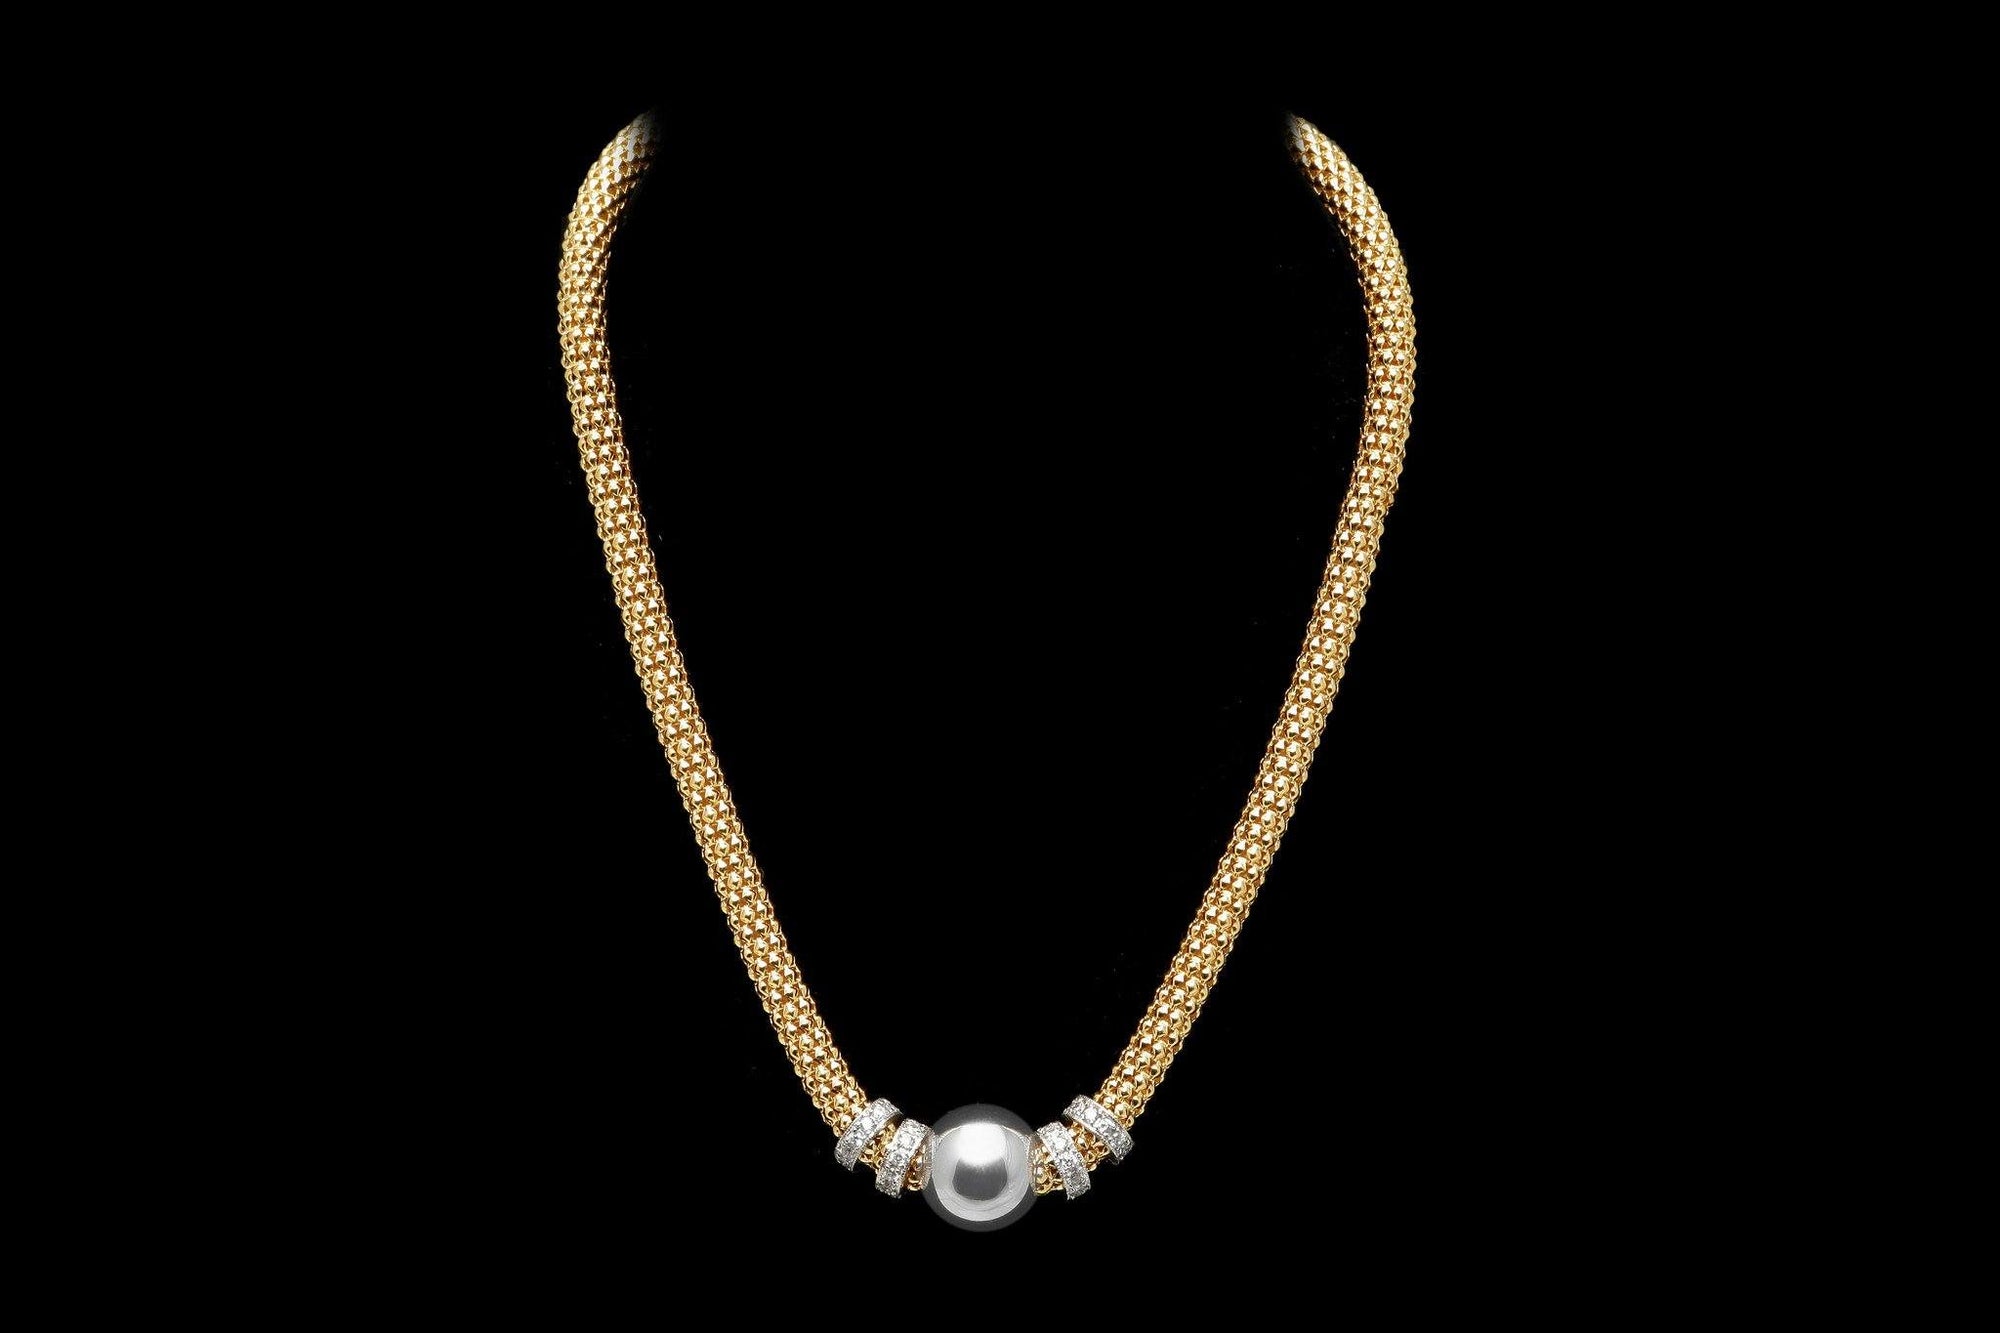 Yellow Gold Plated Silver Beaded NECKLACE with multiple Rows of Cubic Zirconia Rings  - Ceilo Milan - Ninostyle